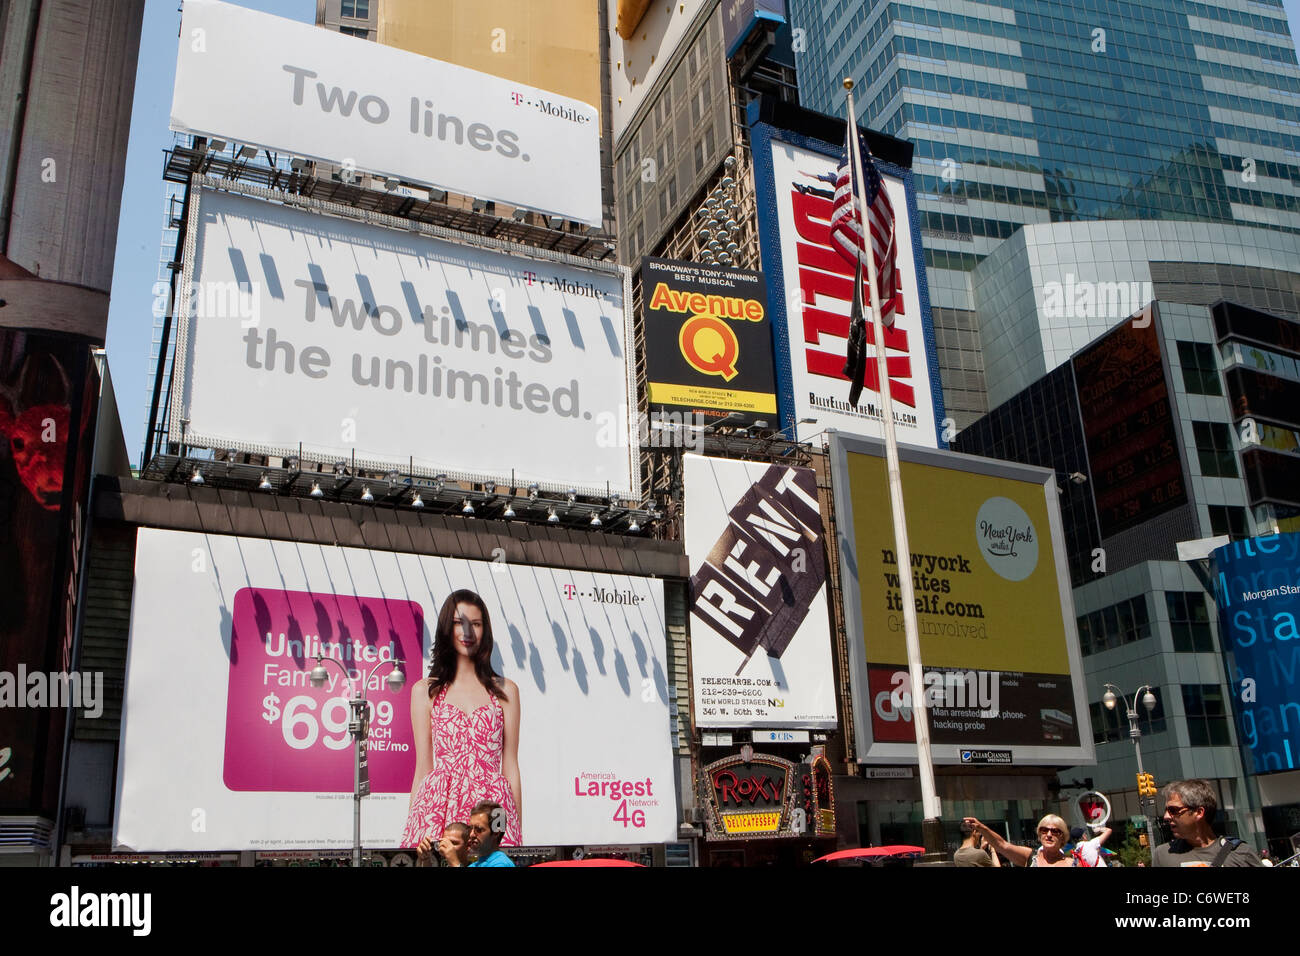 Various advertising boards are pictured on Times Square in the New York City borough of Manhattan, NY, Tuesday August 2, 2011. Stock Photo